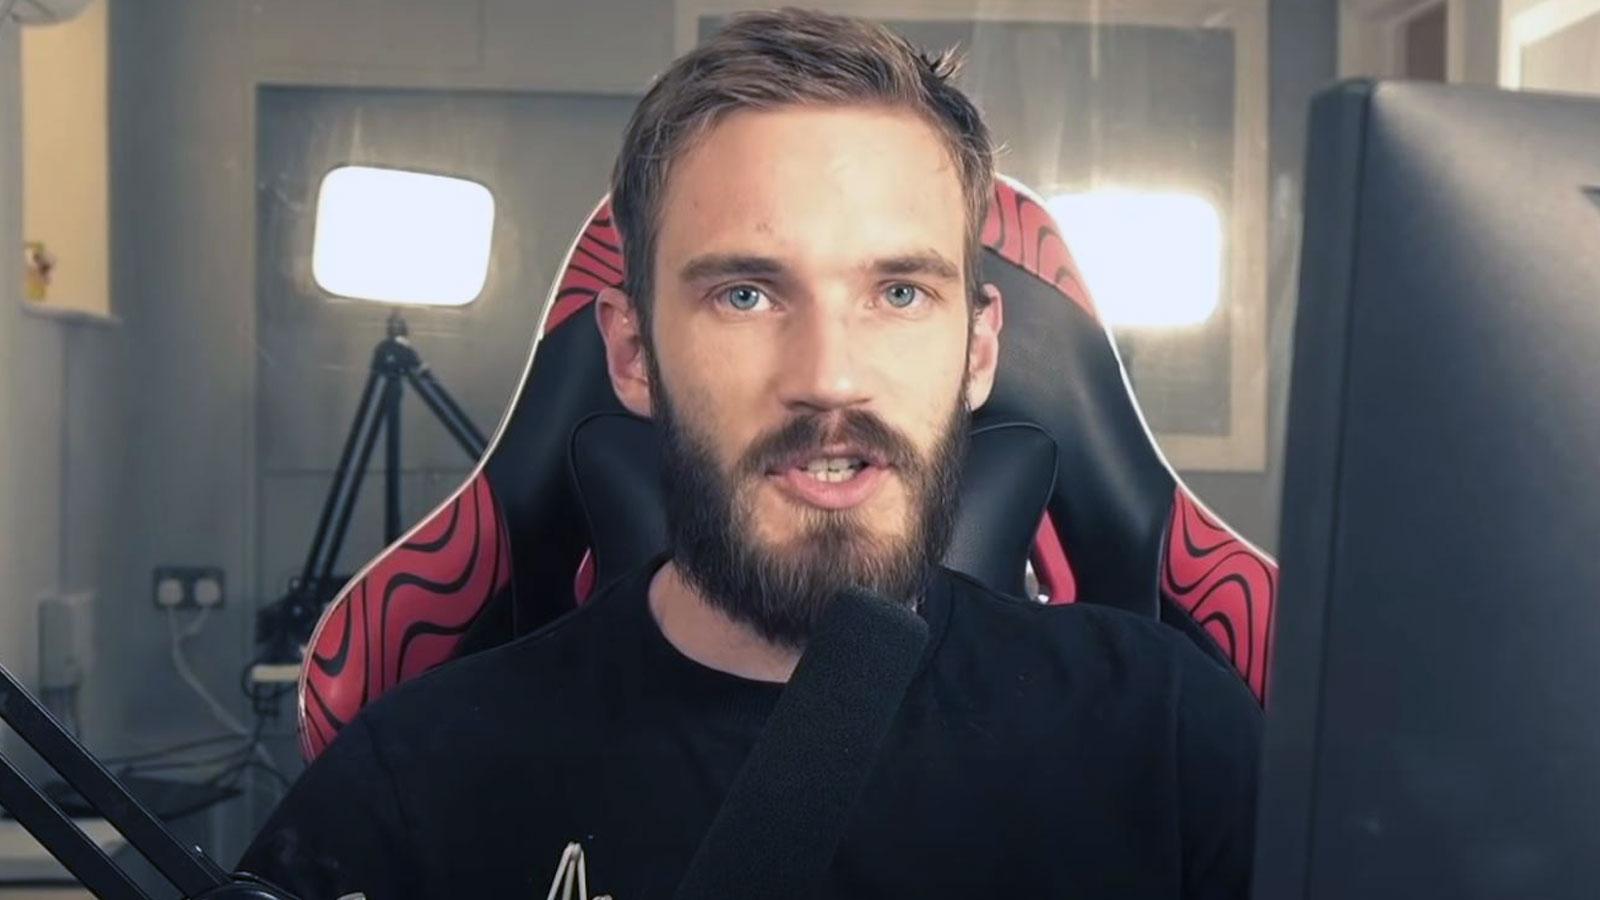 pewdiepie sitting in front of pc